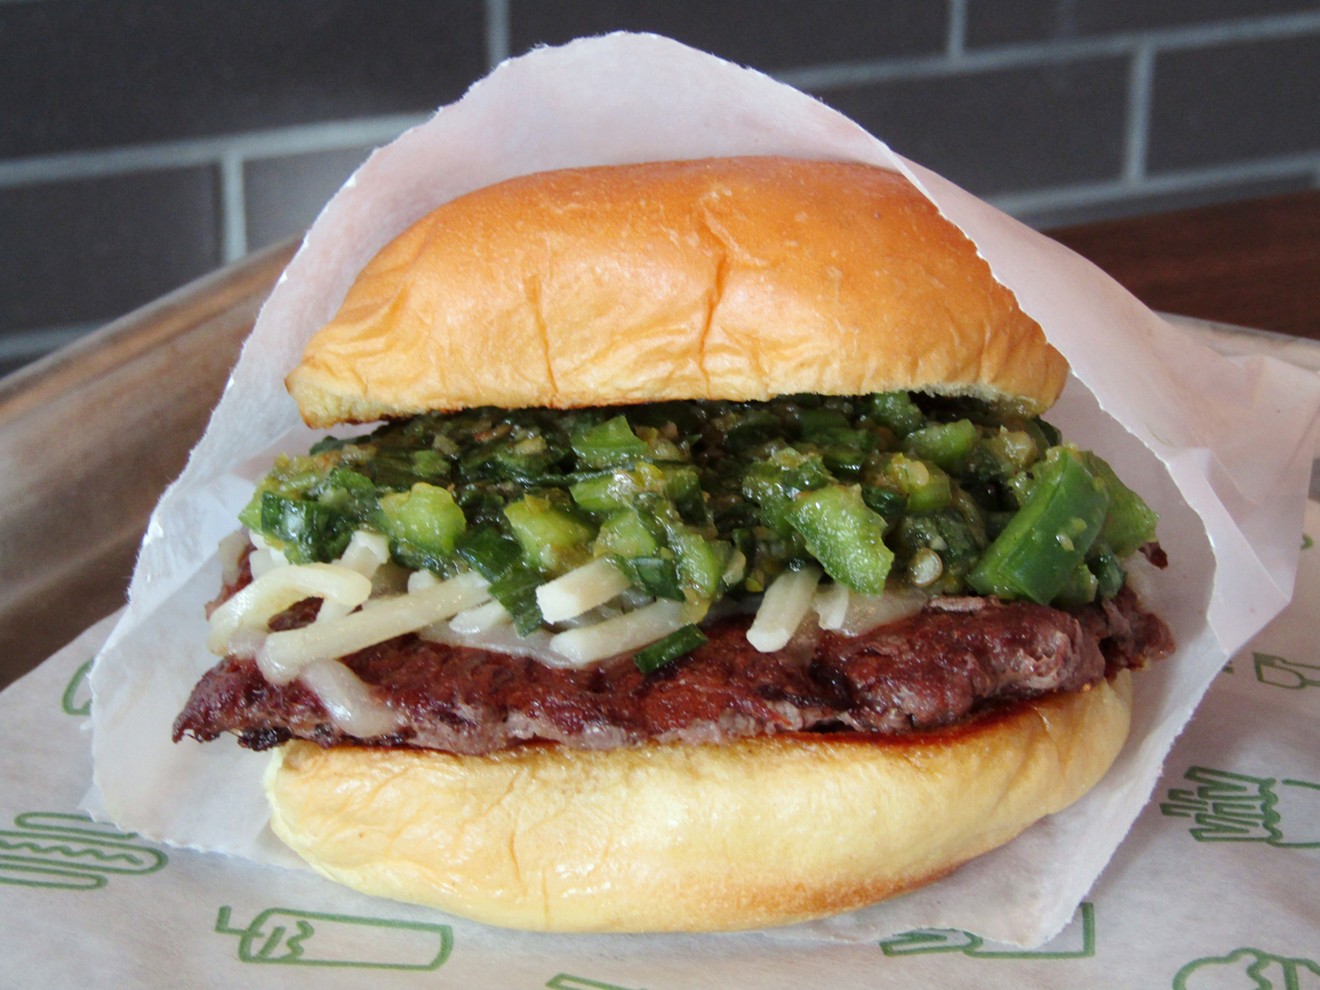 Shake Shack unveils its new regional burger on Wednesday, March 21.